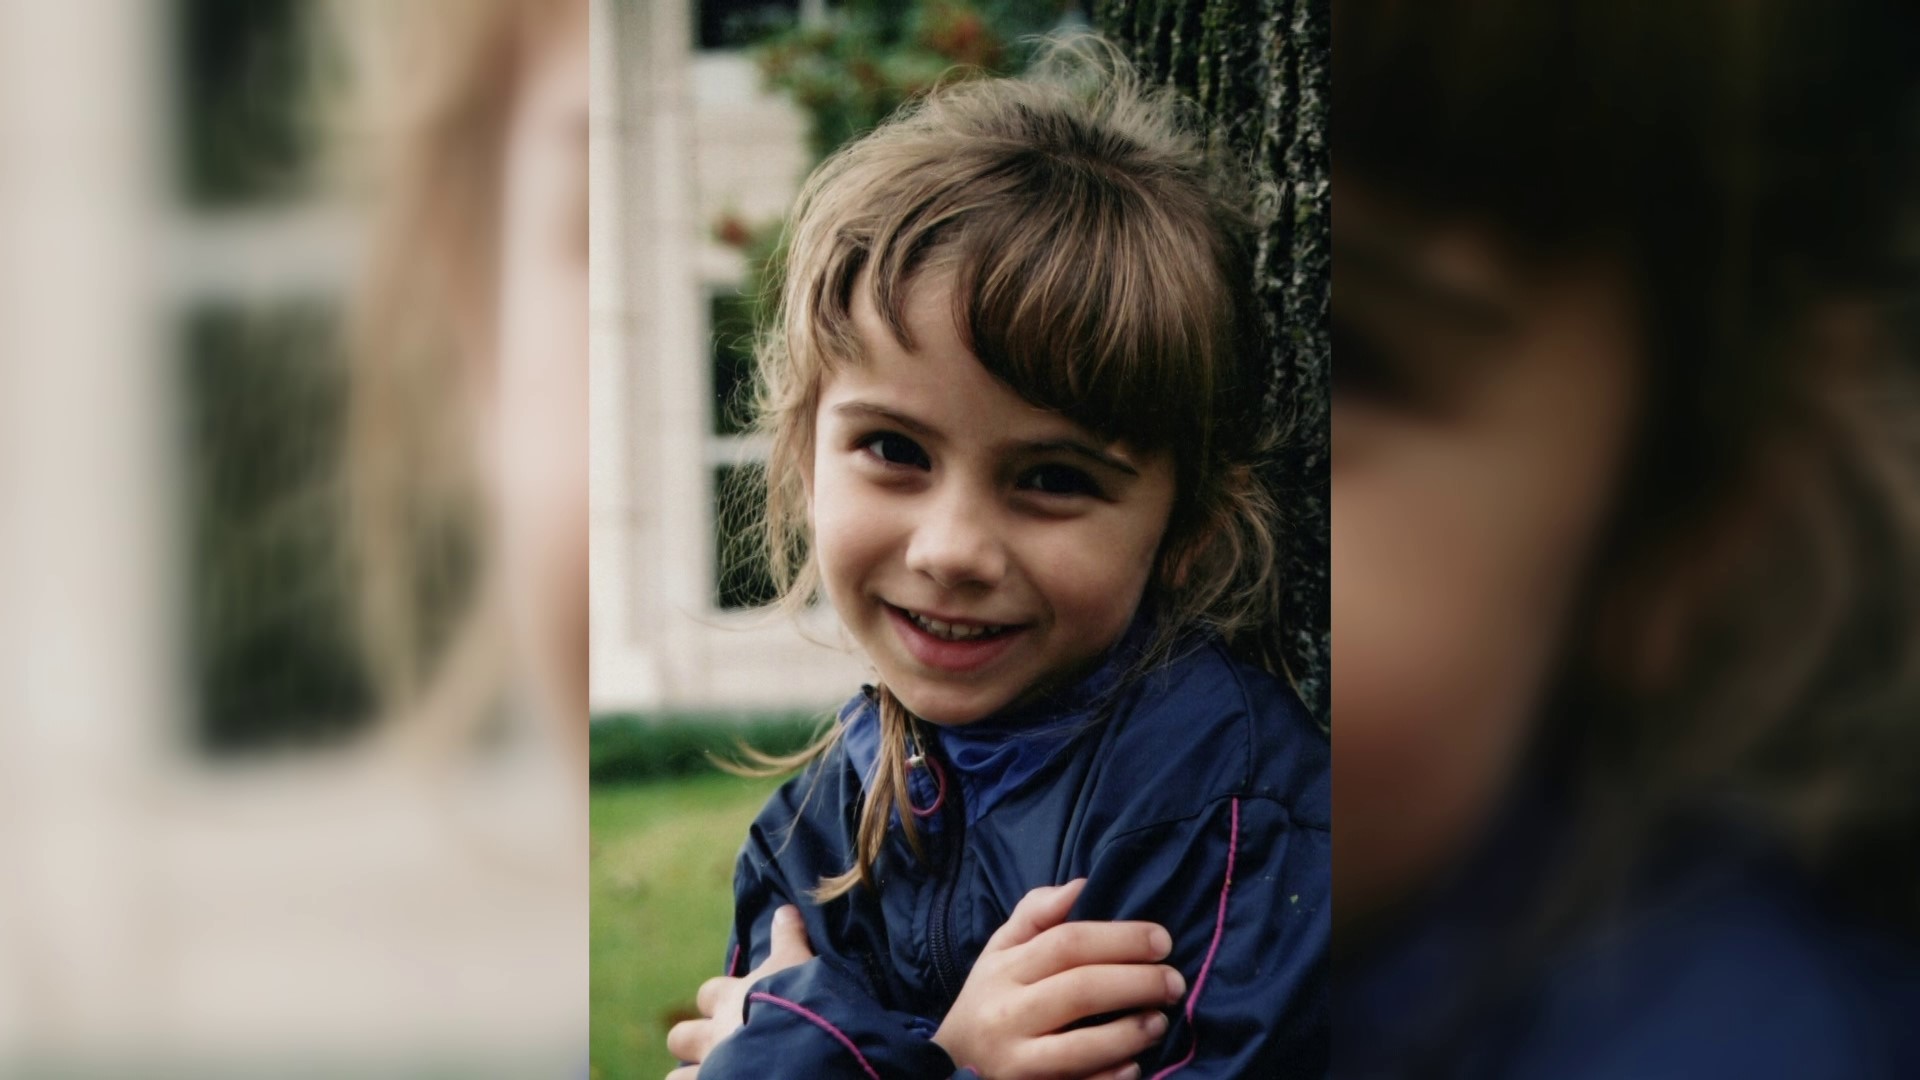 On April 29, 2001, 6-year-old Haley Zega became lost while hiking in Arkansas. She was found safe 52 hours later, on May 1, 2001.